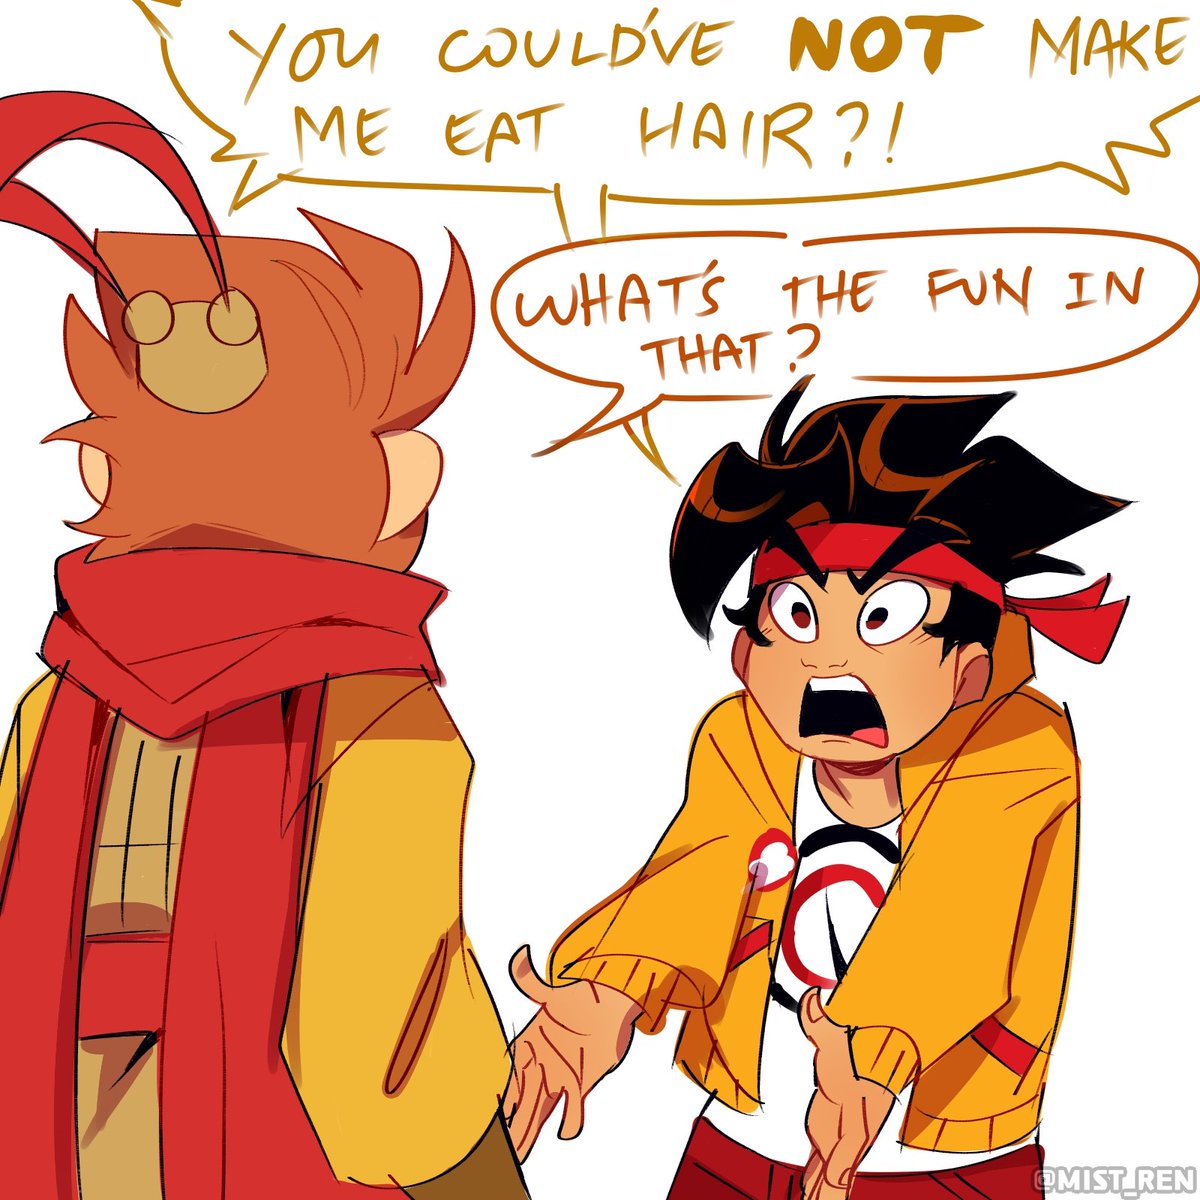 Idk, been thinking wukong could flawlessly cook/bake if he wanted to-

[#LEGOMonkieKid #sunburstduo]